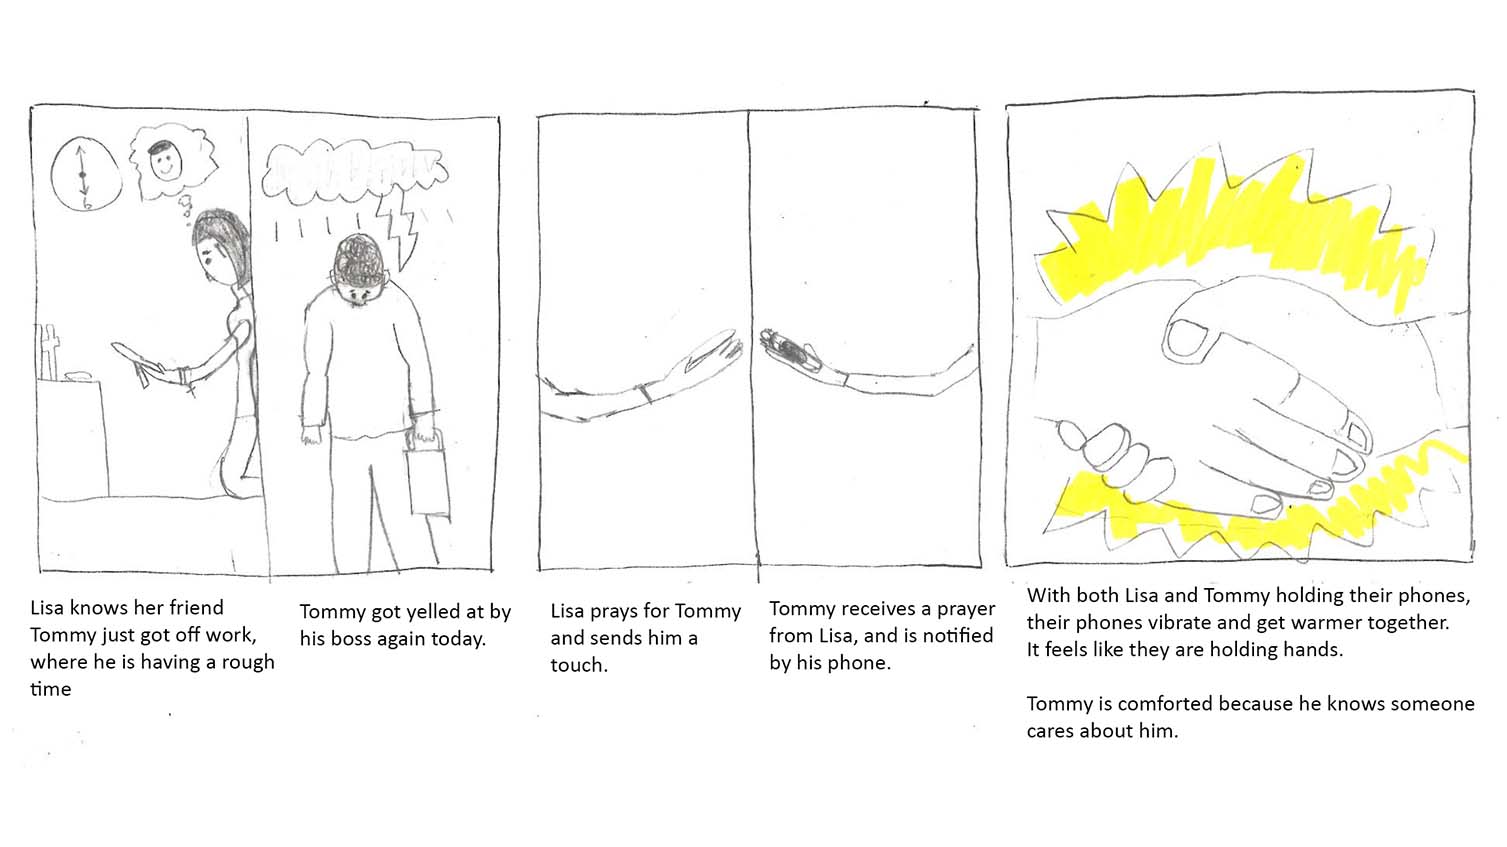 Second storyboard